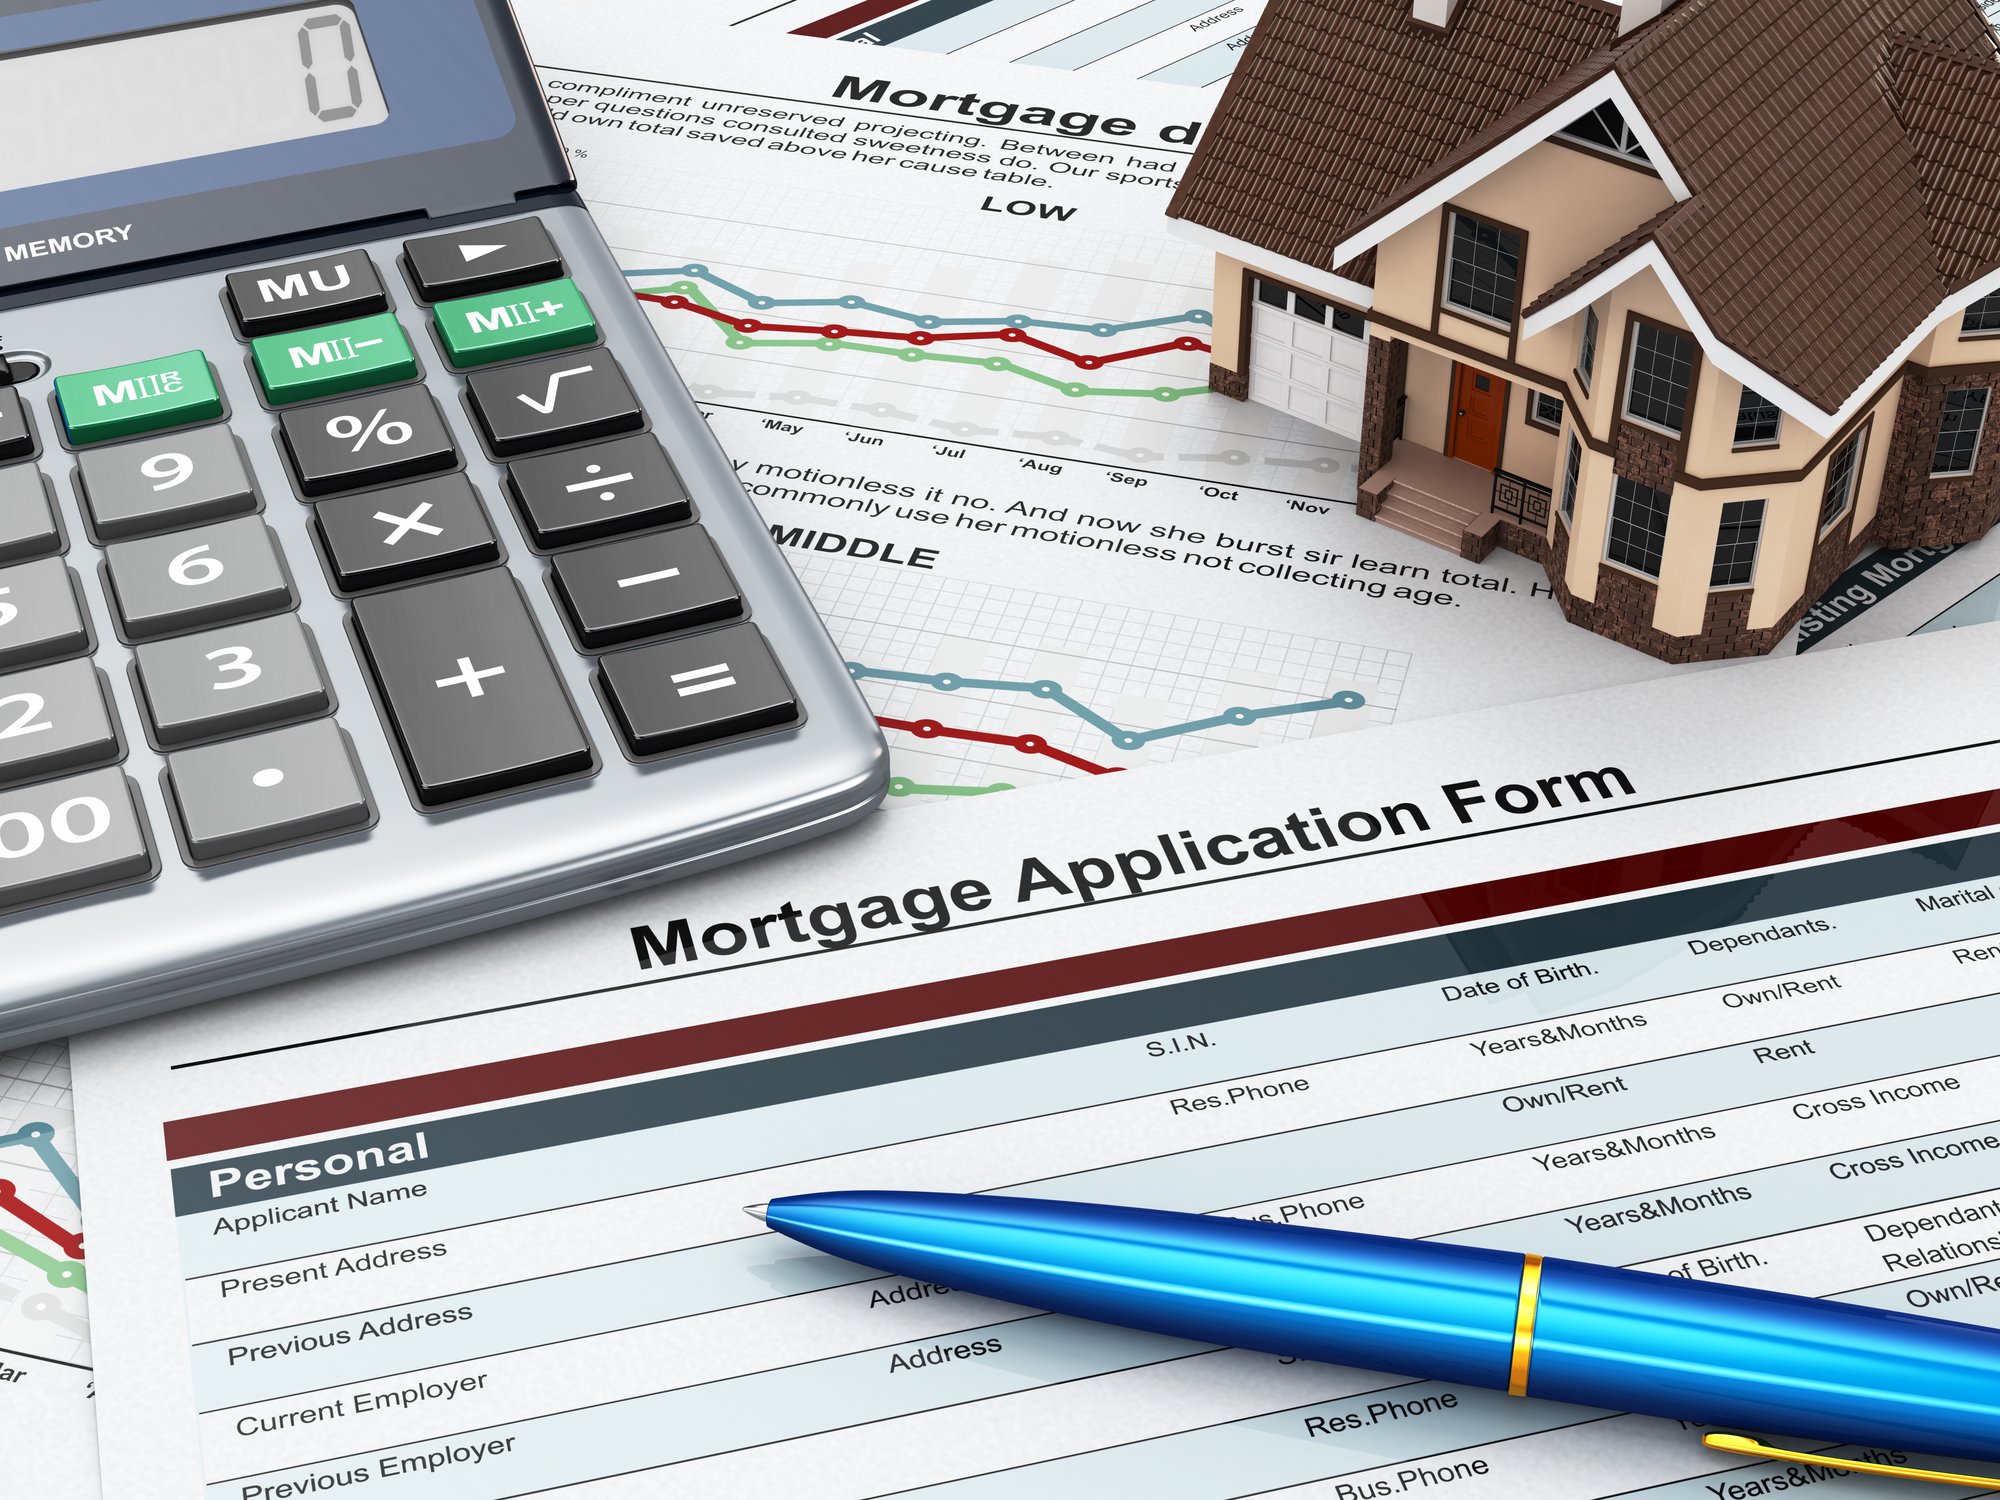 How Do Appraisals Affect Your Mortgage?